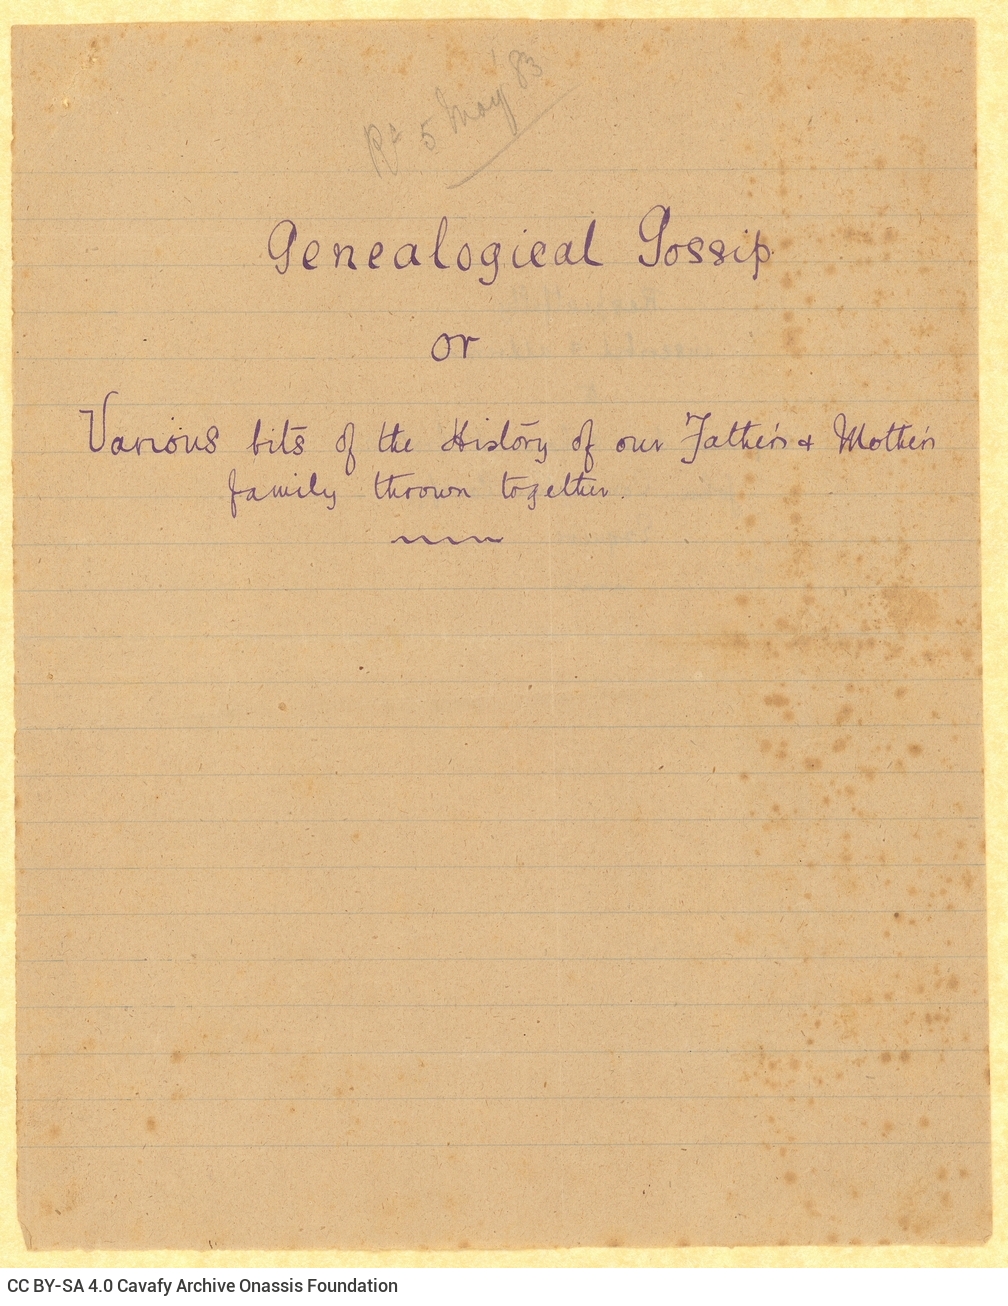 Handwritten text on seven sheets and one piece of paper. On the recto of the first sheet, the title "Genealogical Gossip or V